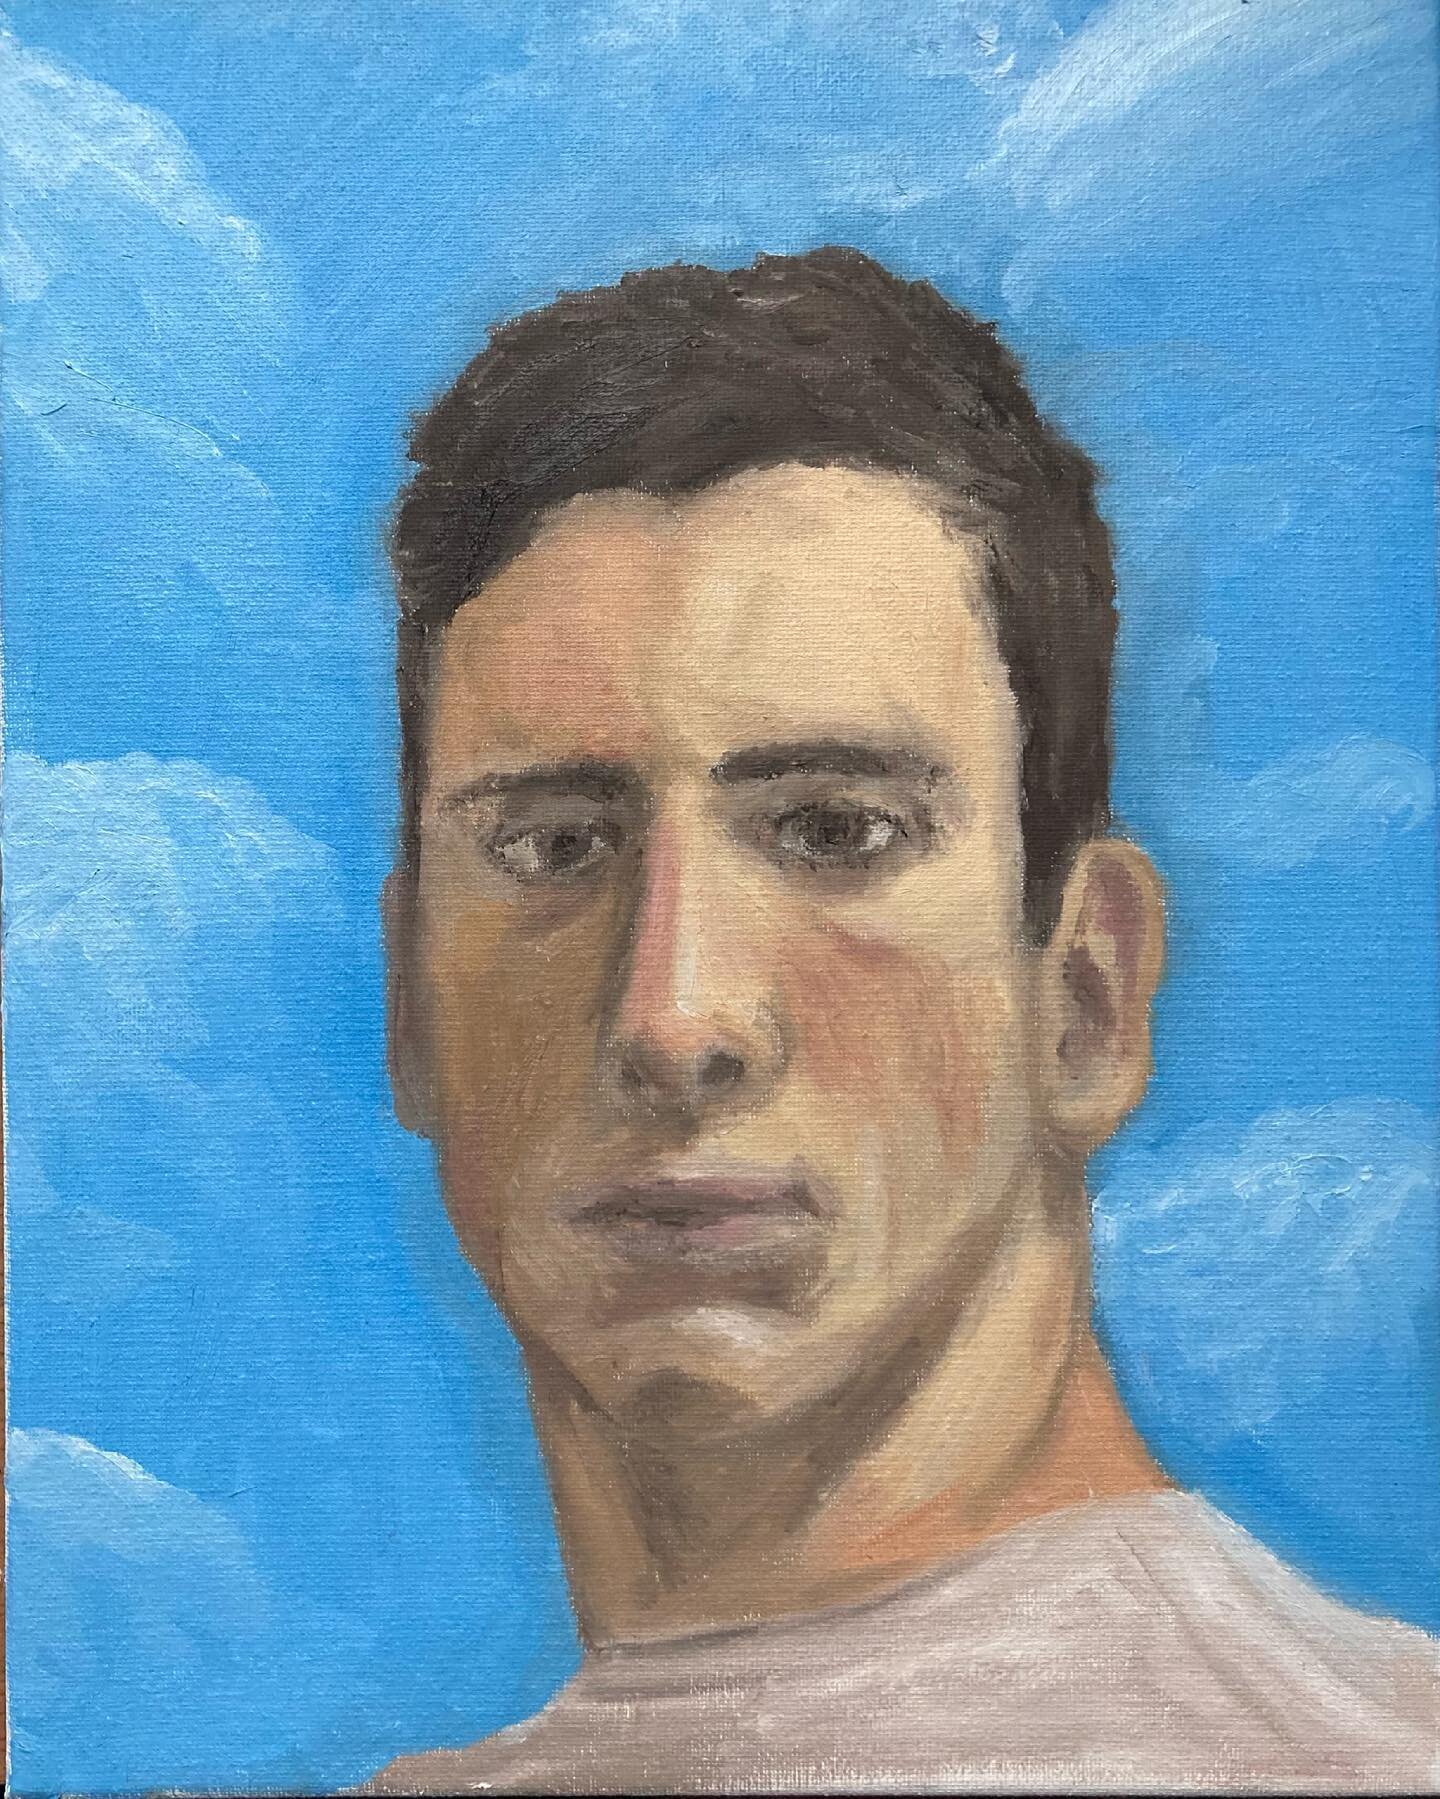 11x14 oil on canvas
I had to make a self portrait and I am glad I did because I feel like this one turned out much better than my previous self portrait. I definitely learned a lot about drawing and painting to help improve this one and I am much mor